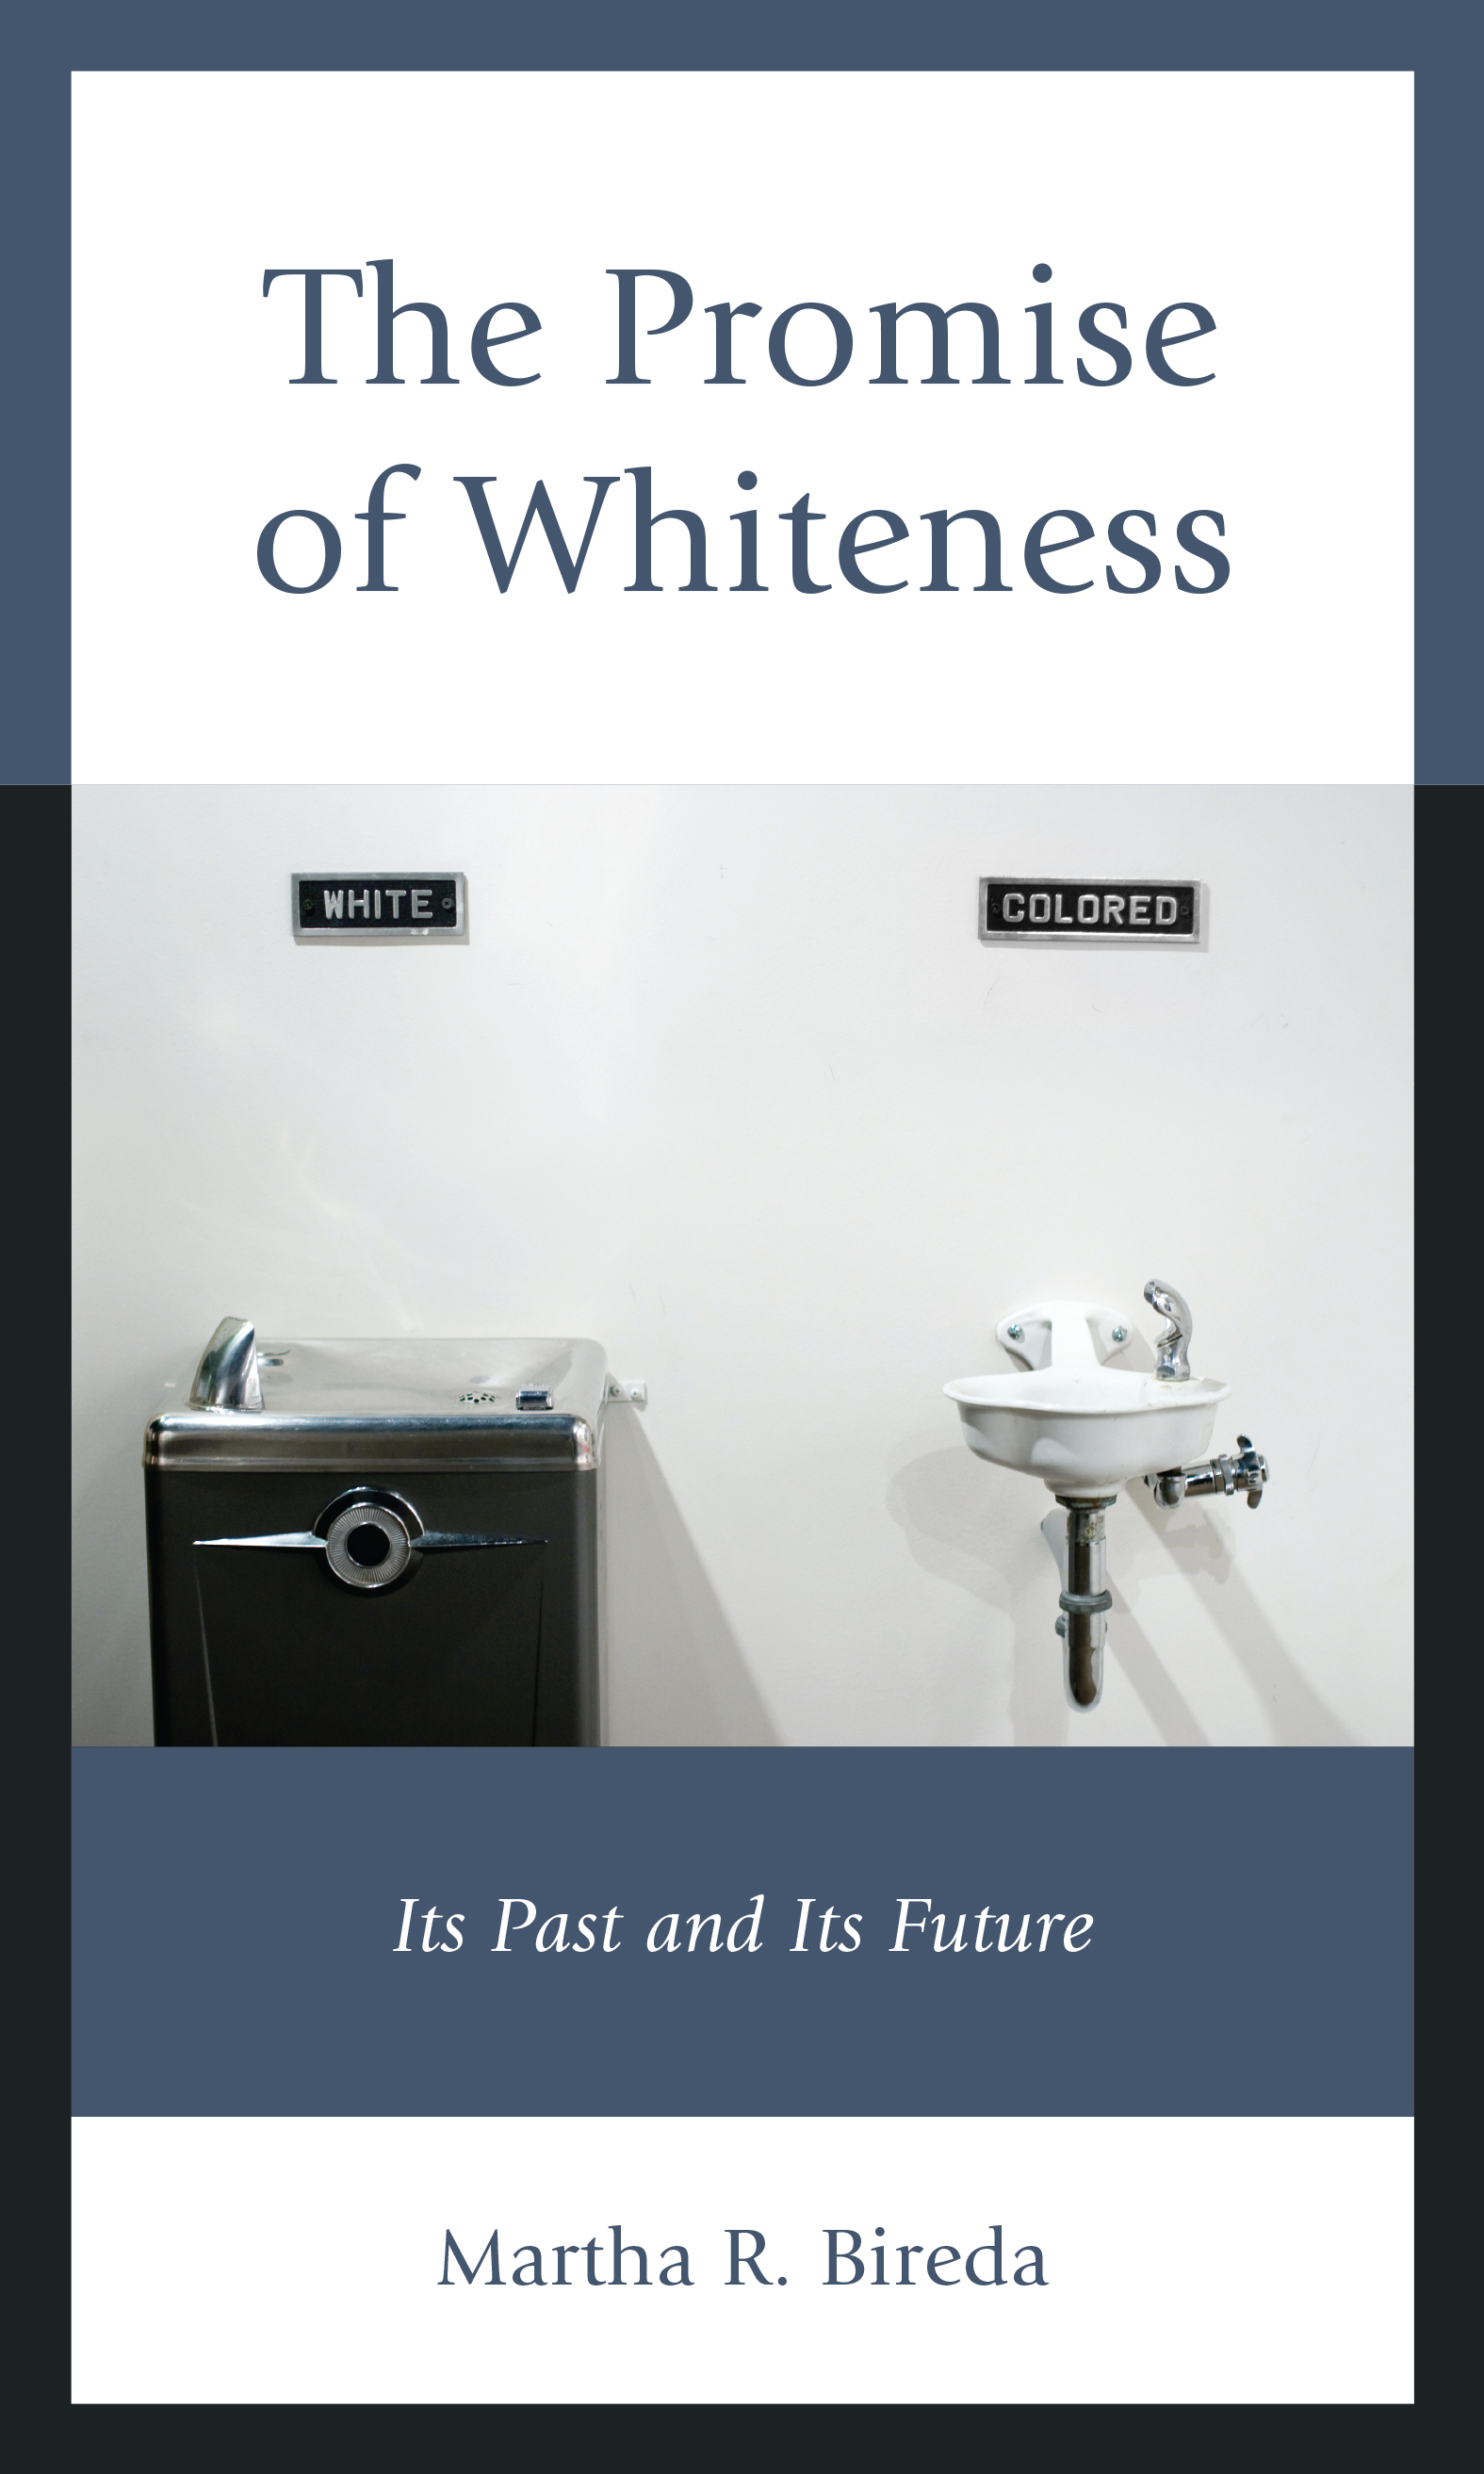 The Promise of Whiteness: Its Past and Its Future